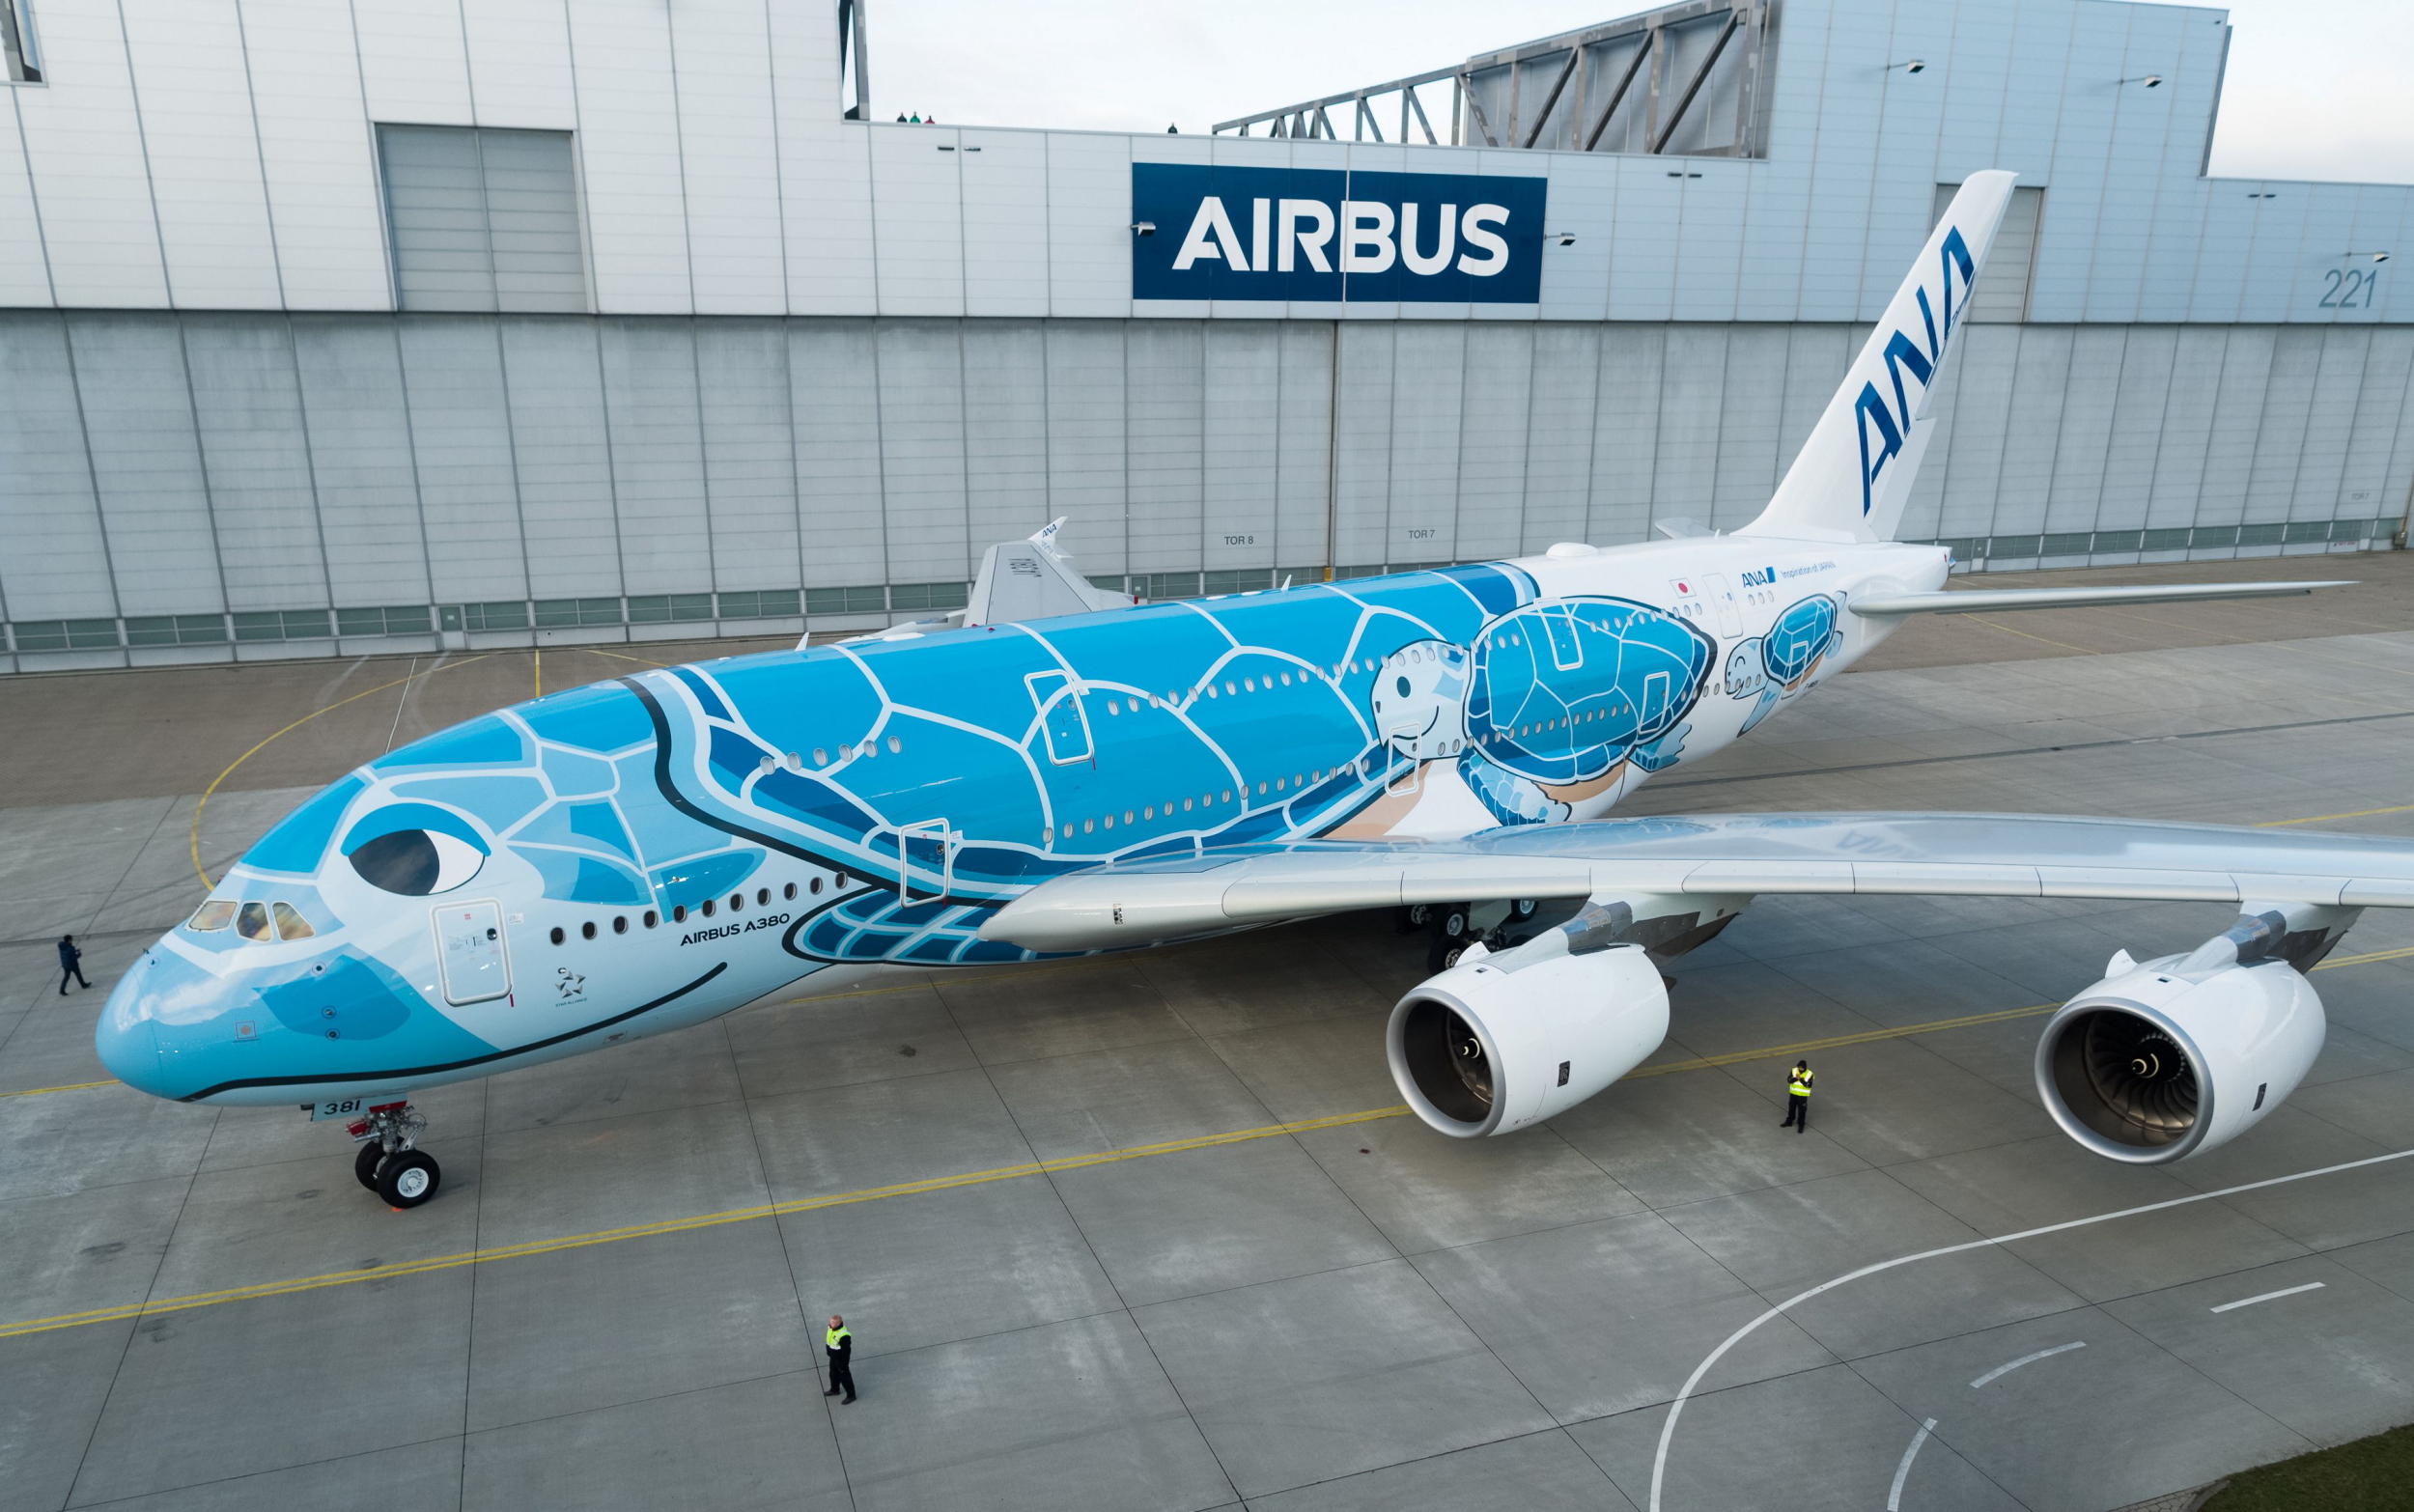 The first A380 for All Nippon Airways (ANA) has rolled out of the Airbus paint shop in Hamburg, Germany, bearing the airline’s distinctive and unique Hawaiian green sea turtle livery. ANA has firm orders for three A380s, becoming the first customer for the superjumbo in Japan. The airline will take delivery of the first A380 at the end of the first quarter of 2019 and will operate the aircraft on the popular leisure Narita-Honolulu route. Click to enlarge.